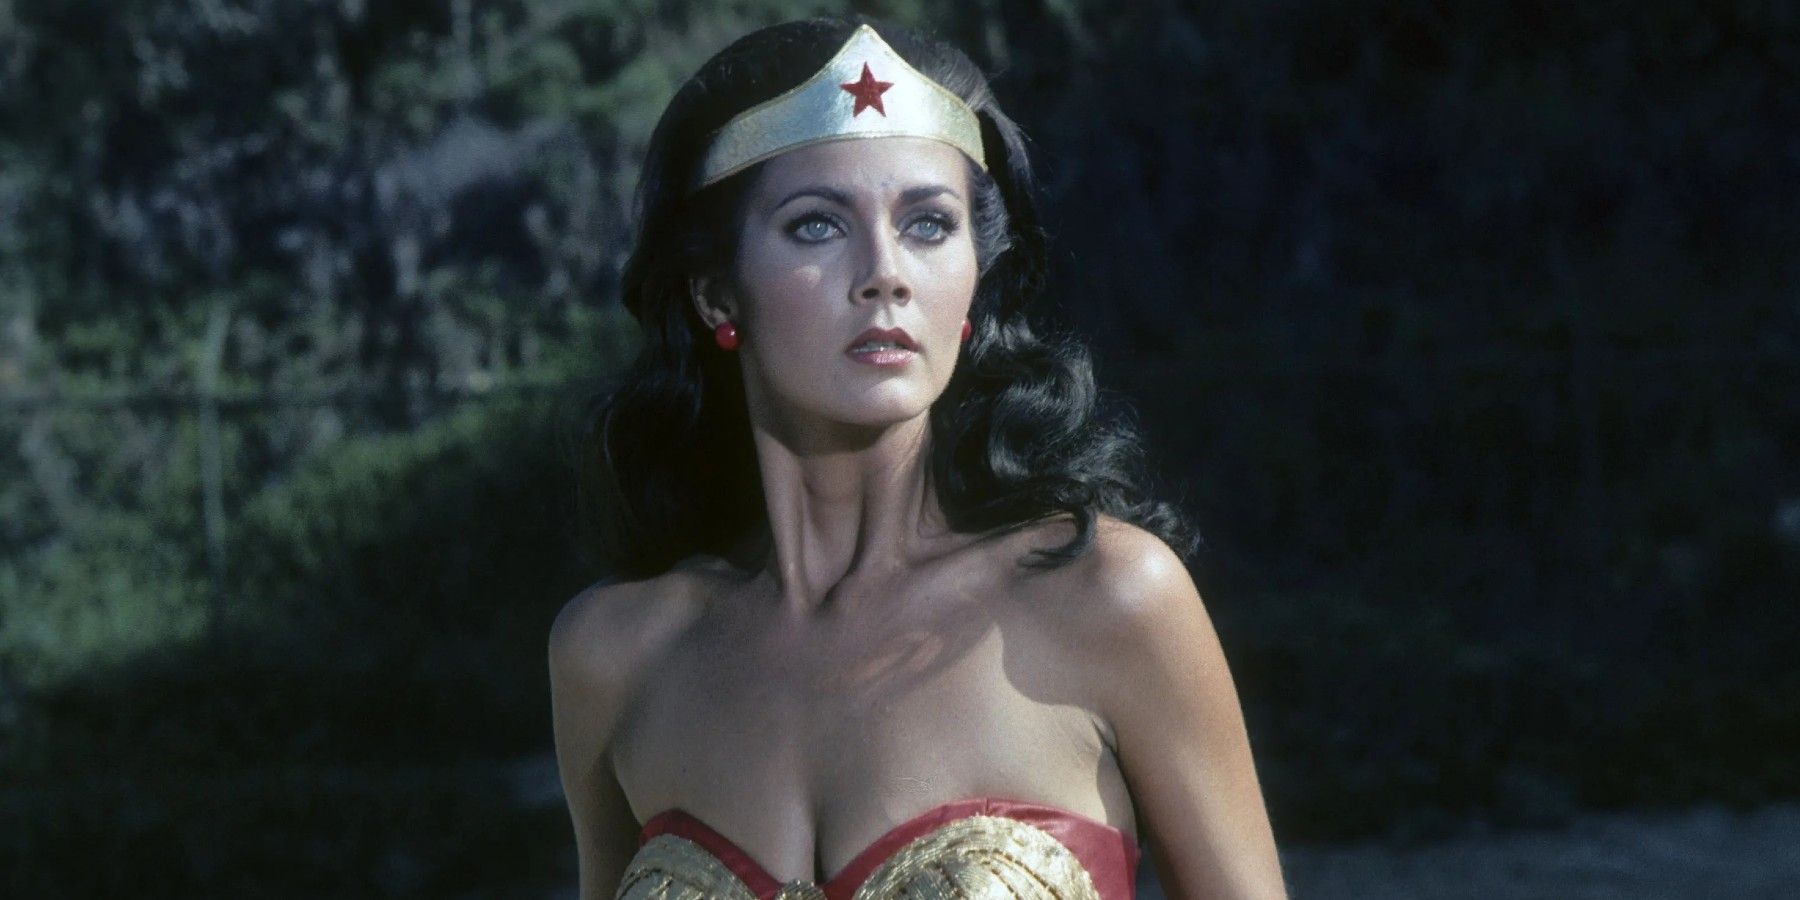 Wonder Woman, played by Lynda Carter, in the Wonder Woman TV show